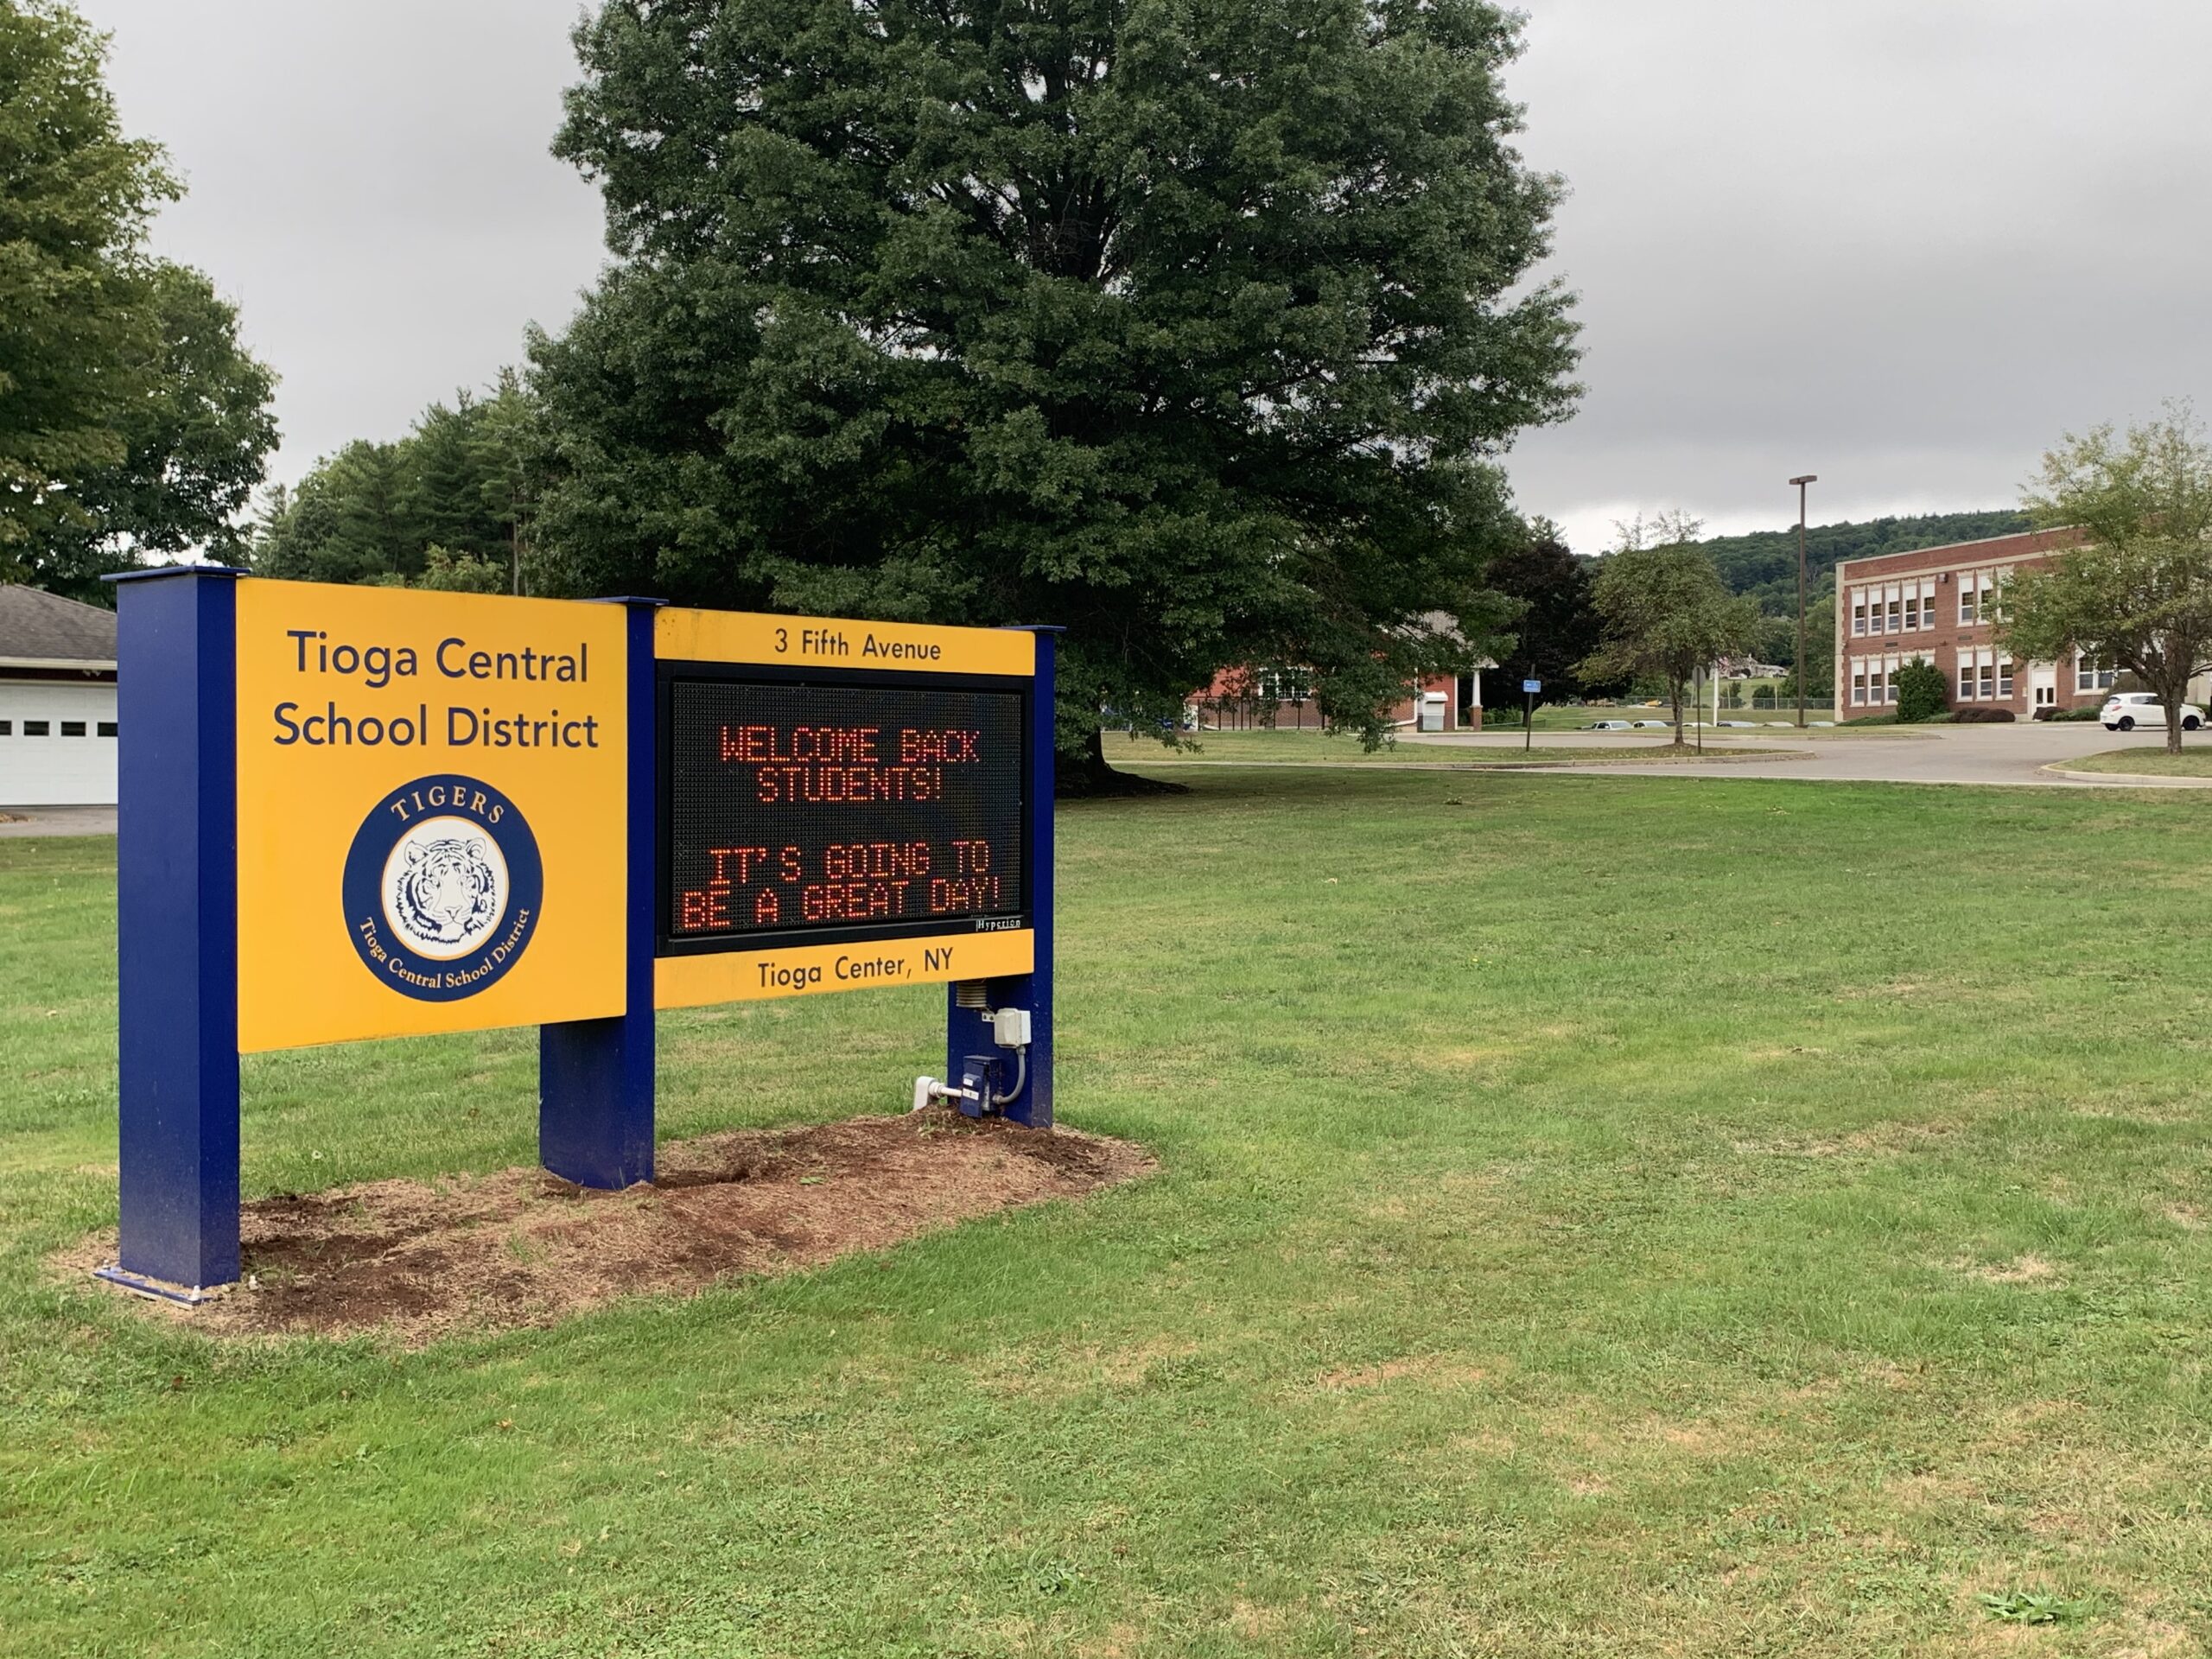 Tioga Central opens for the new school year, with changes